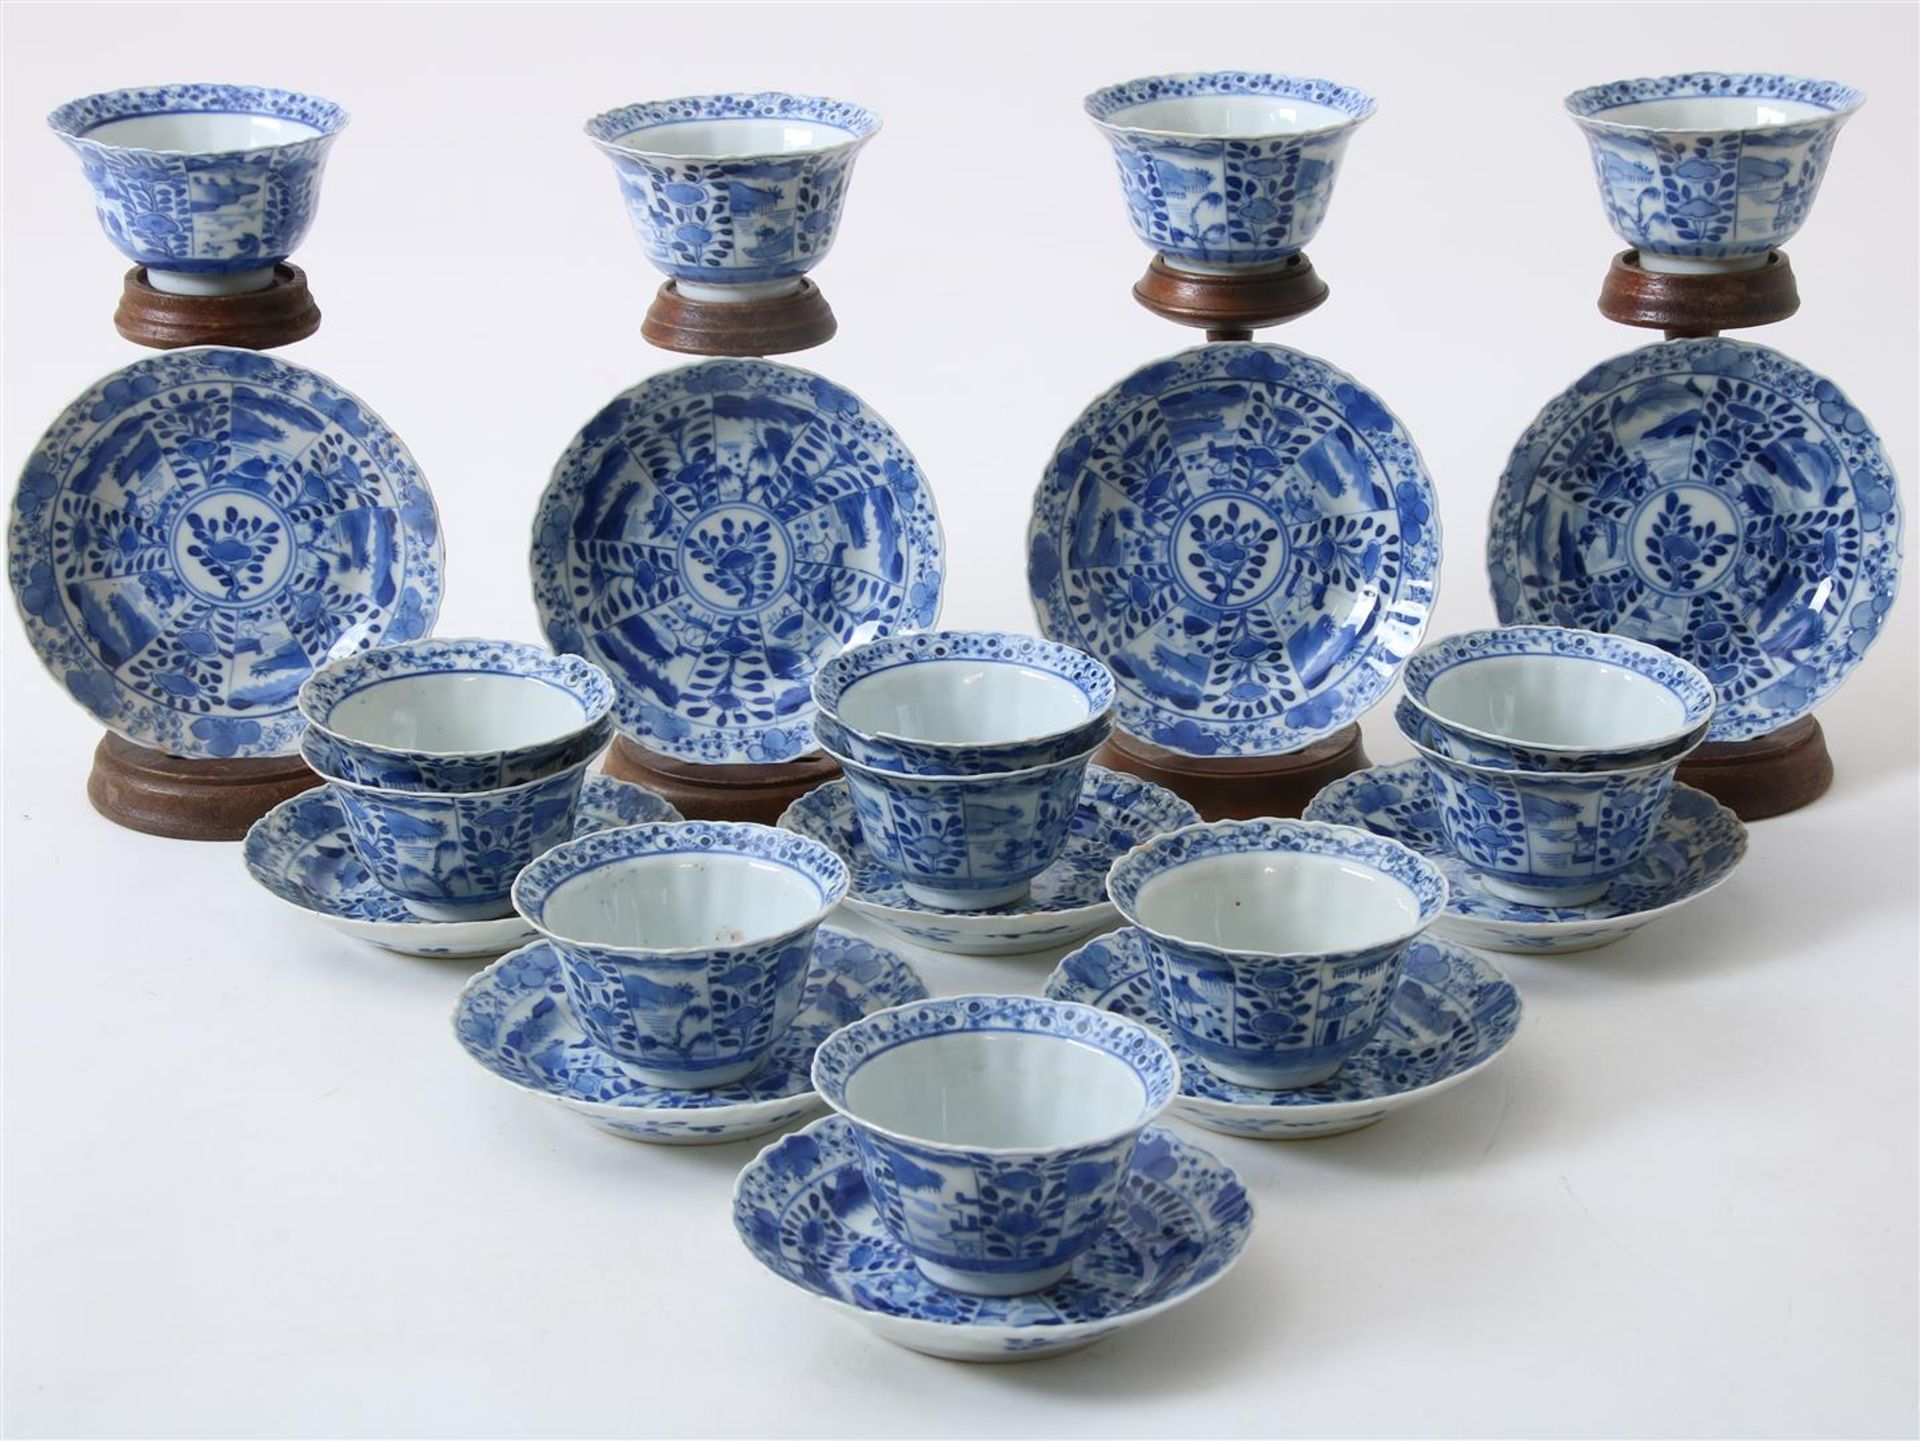 Lot of 13 porcelain cups and 10 saucers decorated with landscapes and parsley decor, Kangxi mark,